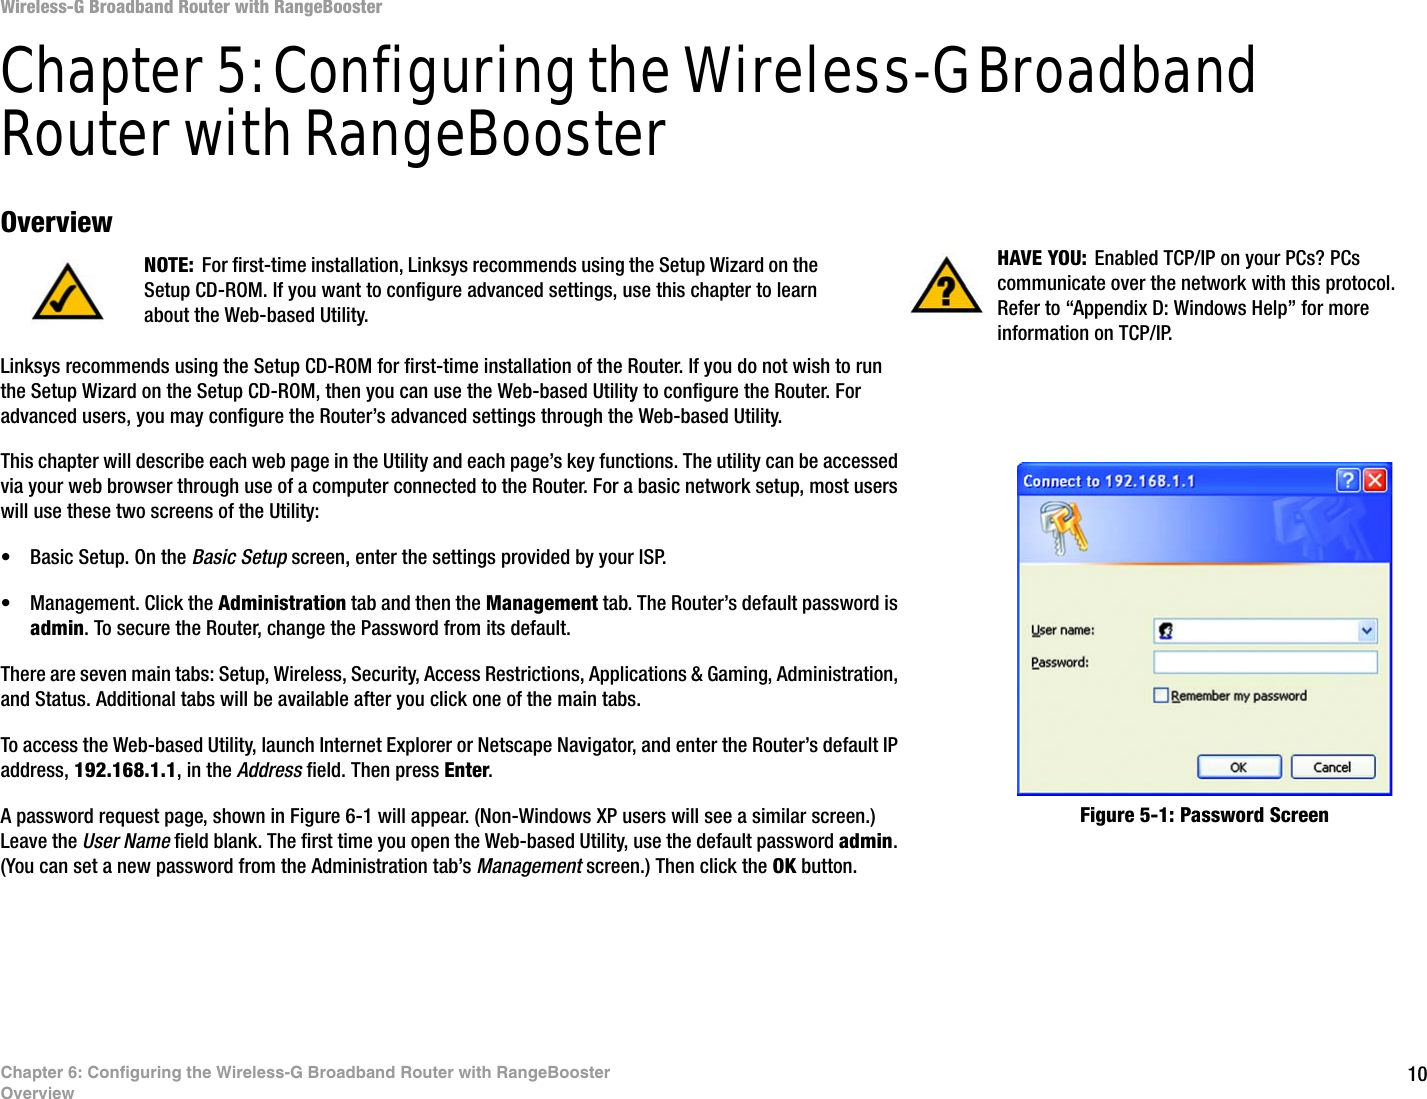 10Chapter 6: Configuring the Wireless-G Broadband Router with RangeBoosterOverviewWireless-G Broadband Router with RangeBoosterChapter 5: Configuring the Wireless-G Broadband Router with RangeBoosterOverviewLinksys recommends using the Setup CD-ROM for first-time installation of the Router. If you do not wish to run the Setup Wizard on the Setup CD-ROM, then you can use the Web-based Utility to configure the Router. For advanced users, you may configure the Router’s advanced settings through the Web-based Utility.This chapter will describe each web page in the Utility and each page’s key functions. The utility can be accessed via your web browser through use of a computer connected to the Router. For a basic network setup, most users will use these two screens of the Utility:• Basic Setup. On the Basic Setup screen, enter the settings provided by your ISP.• Management. Click the Administration tab and then the Management tab. The Router’s default password is admin. To secure the Router, change the Password from its default.There are seven main tabs: Setup, Wireless, Security, Access Restrictions, Applications &amp; Gaming, Administration, and Status. Additional tabs will be available after you click one of the main tabs.To access the Web-based Utility, launch Internet Explorer or Netscape Navigator, and enter the Router’s default IP address, 192.168.1.1, in the Address field. Then press Enter. A password request page, shown in Figure 6-1 will appear. (Non-Windows XP users will see a similar screen.) Leave the User Name field blank. The first time you open the Web-based Utility, use the default password admin. (You can set a new password from the Administration tab’s Management screen.) Then click the OK button. HAVE YOU: Enabled TCP/IP on your PCs? PCs communicate over the network with this protocol. Refer to “Appendix D: Windows Help” for more information on TCP/IP.NOTE: For first-time installation, Linksys recommends using the Setup Wizard on the Setup CD-ROM. If you want to configure advanced settings, use this chapter to learn about the Web-based Utility.Figure 5-1: Password Screen